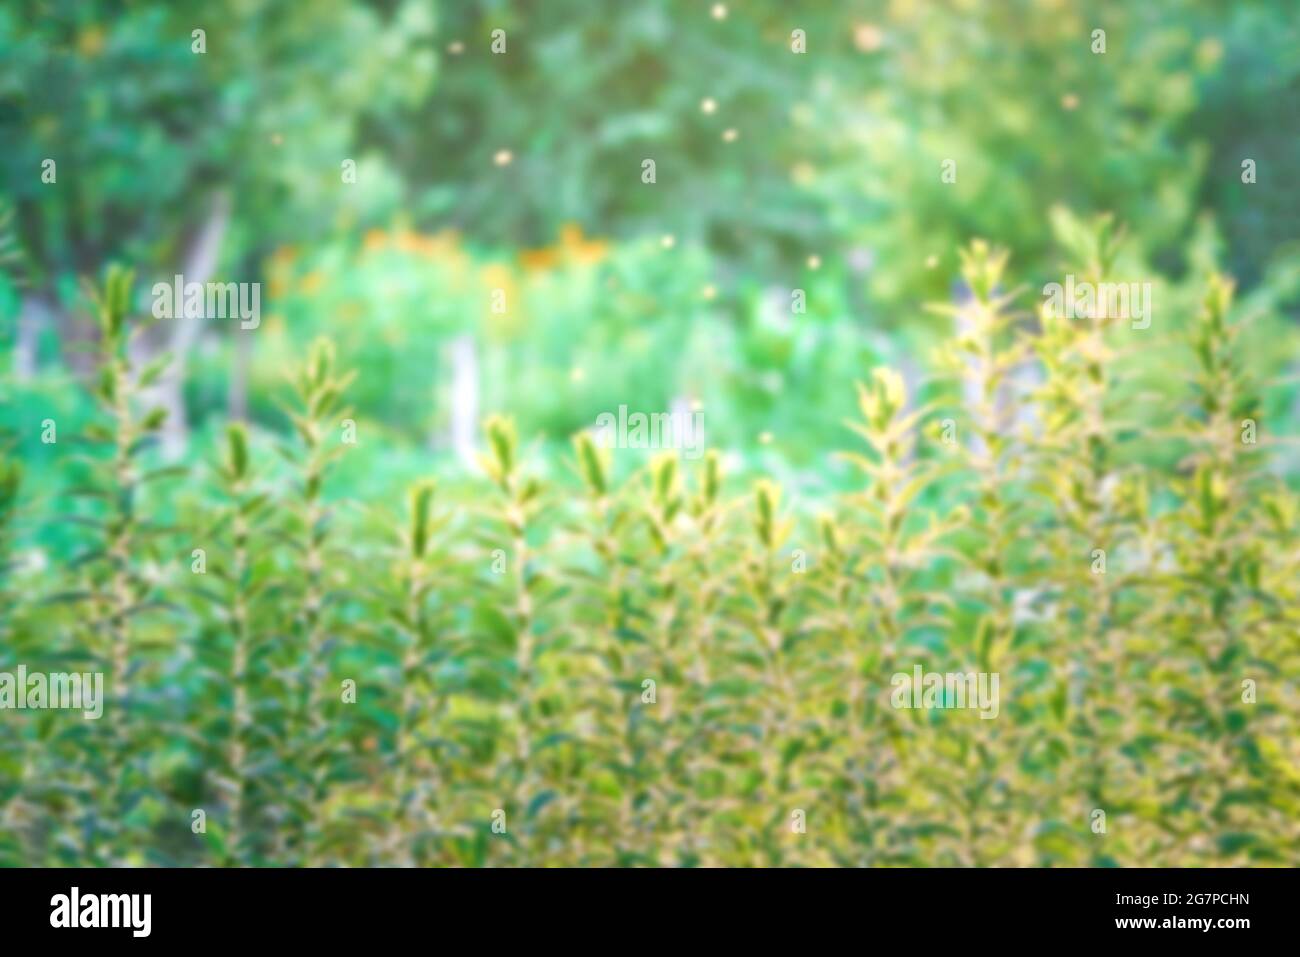 Abstract blur natural background, plants out of focus, copy space. Stock Photo